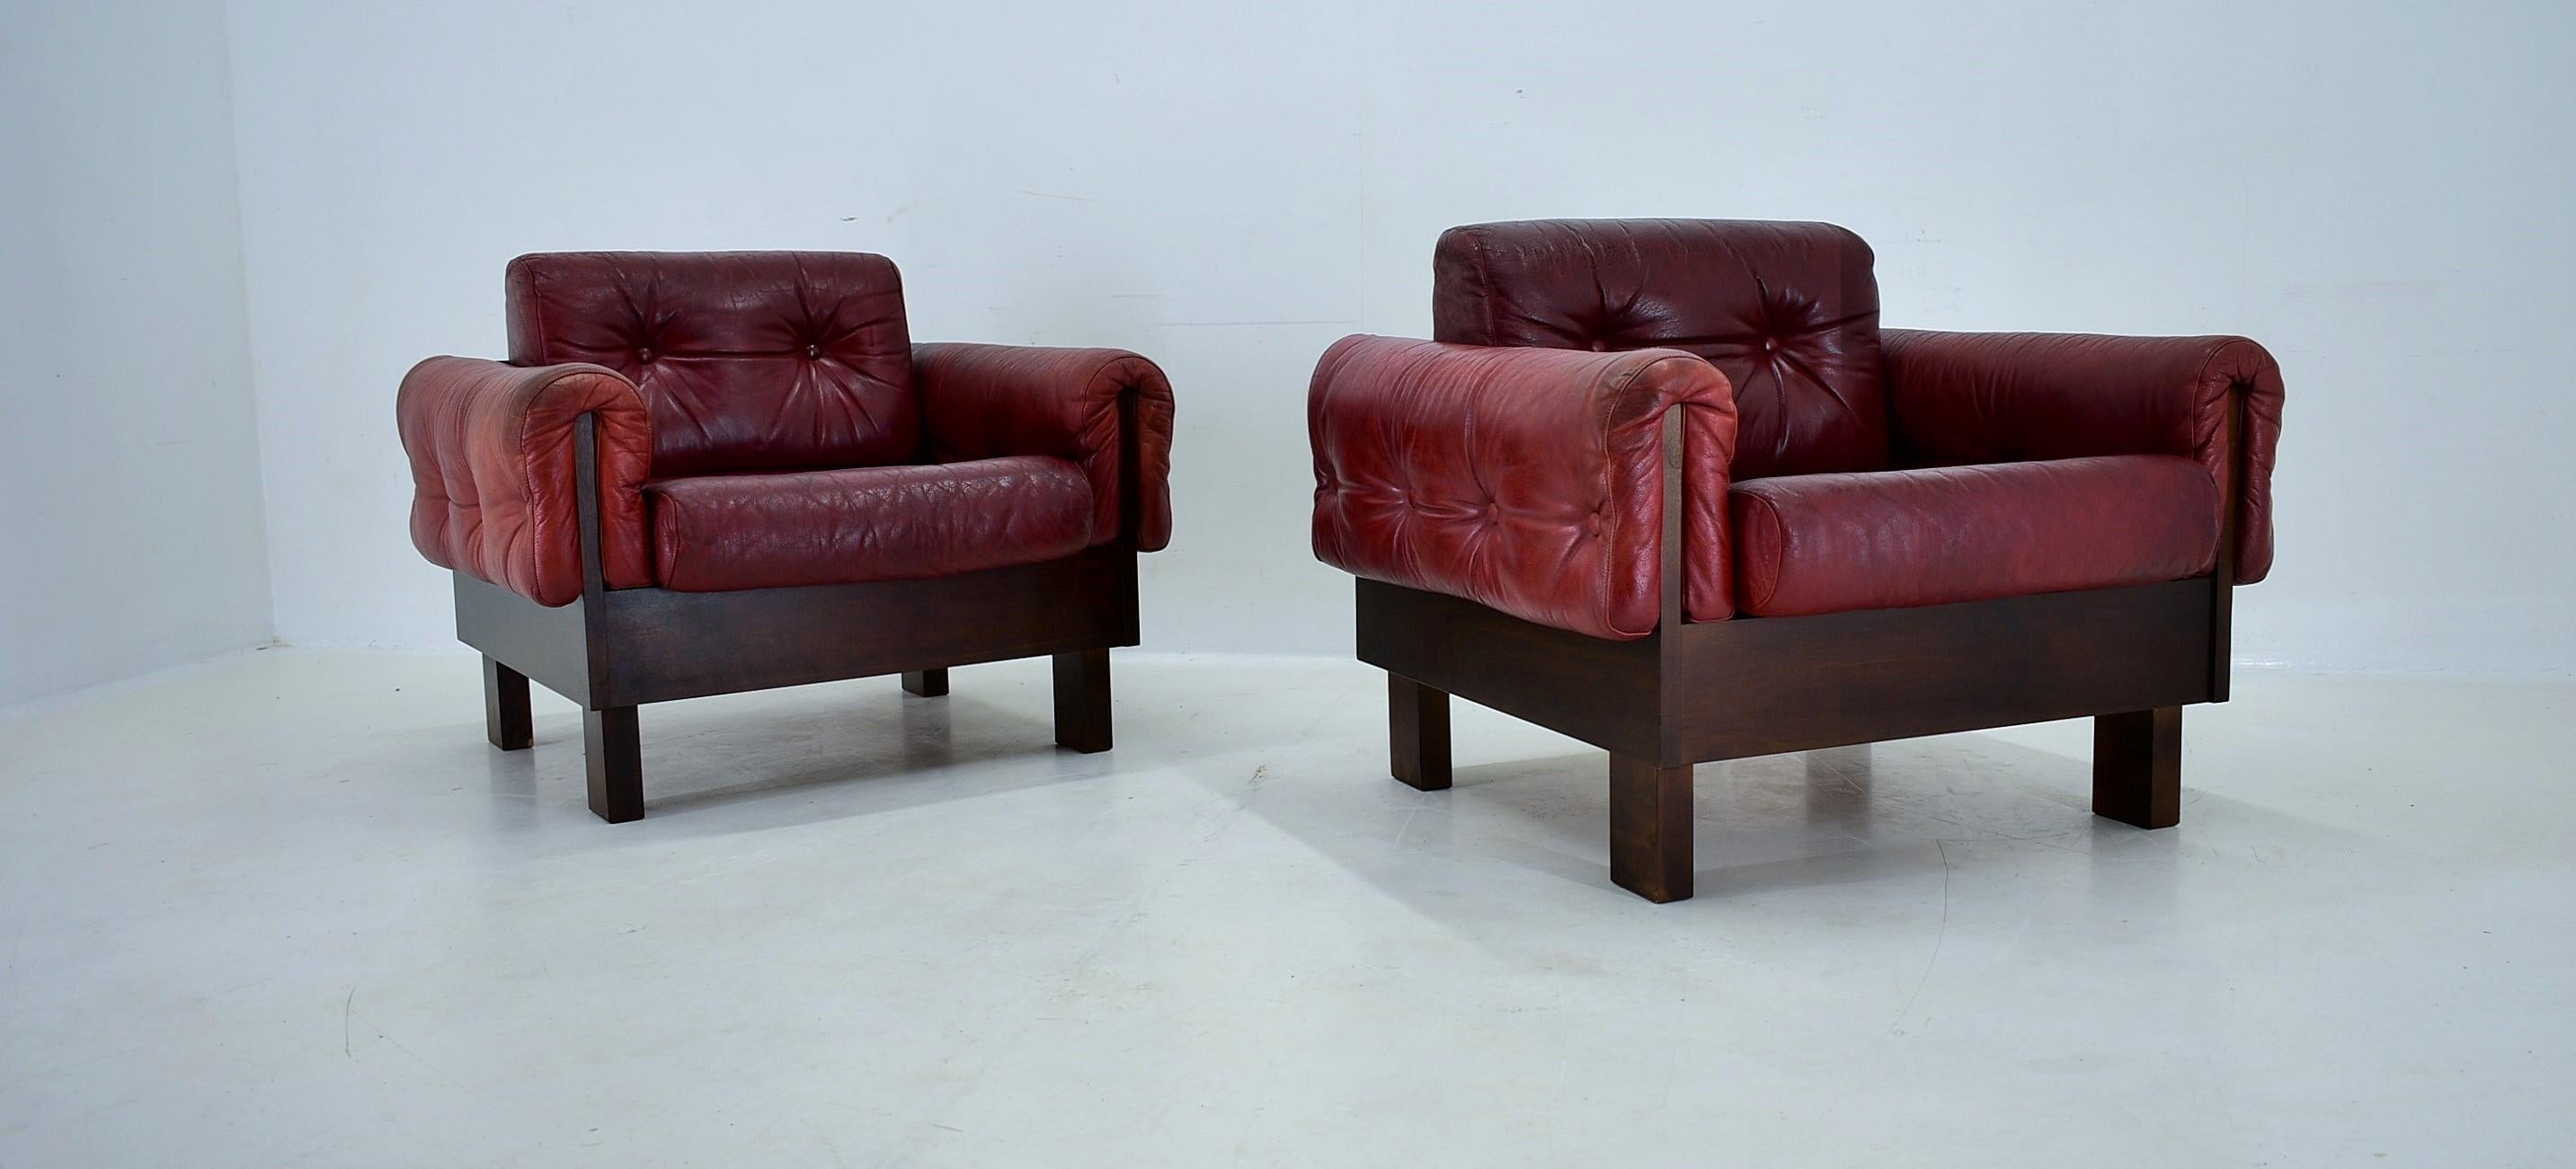 Pair of vintage leather armchairs , Czechoslovakia 1970s For Sale 14